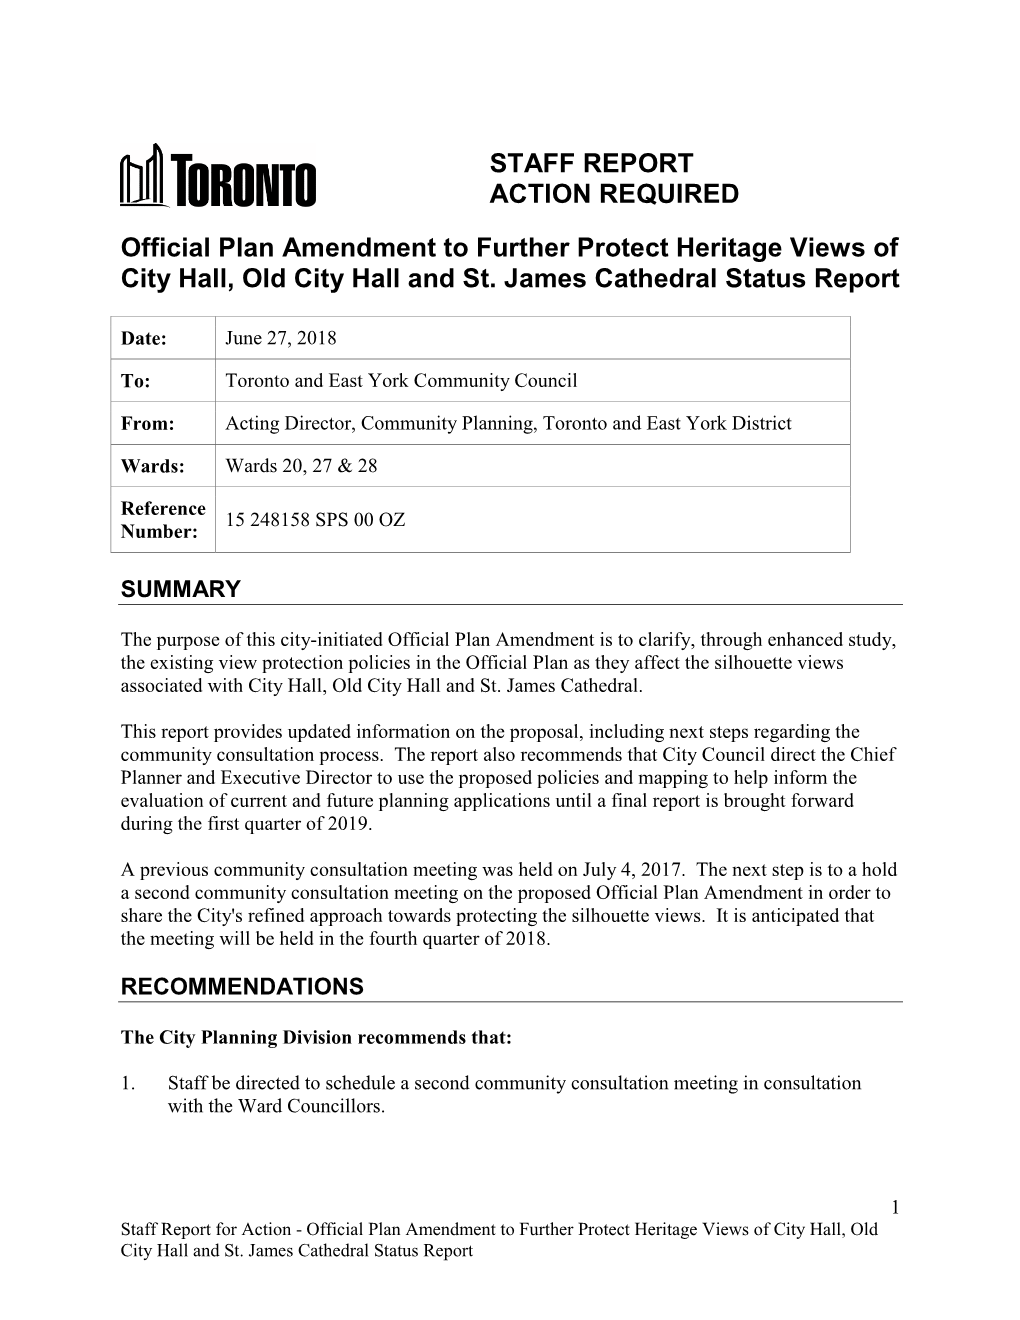 Official Plan Amendment to Further Protect Heritage Views of City Hall, Old City Hall and St